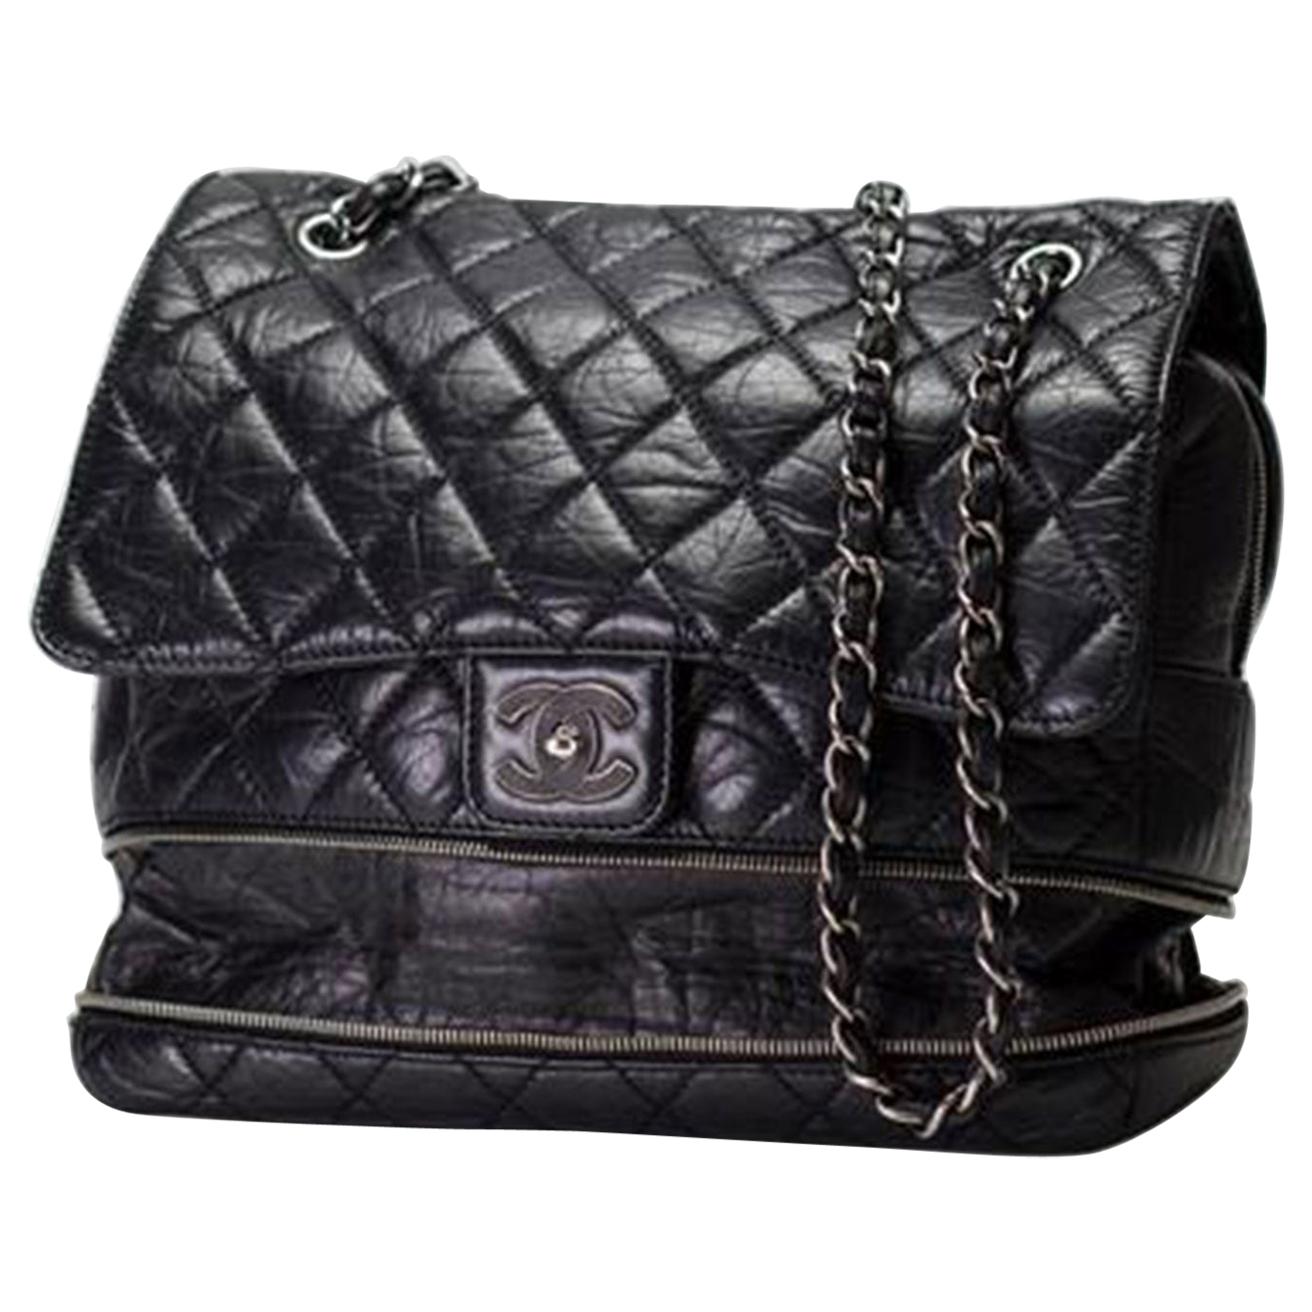 Chanel Classic Flap Limited Edition Pny Jumbo Expandable Calfskin